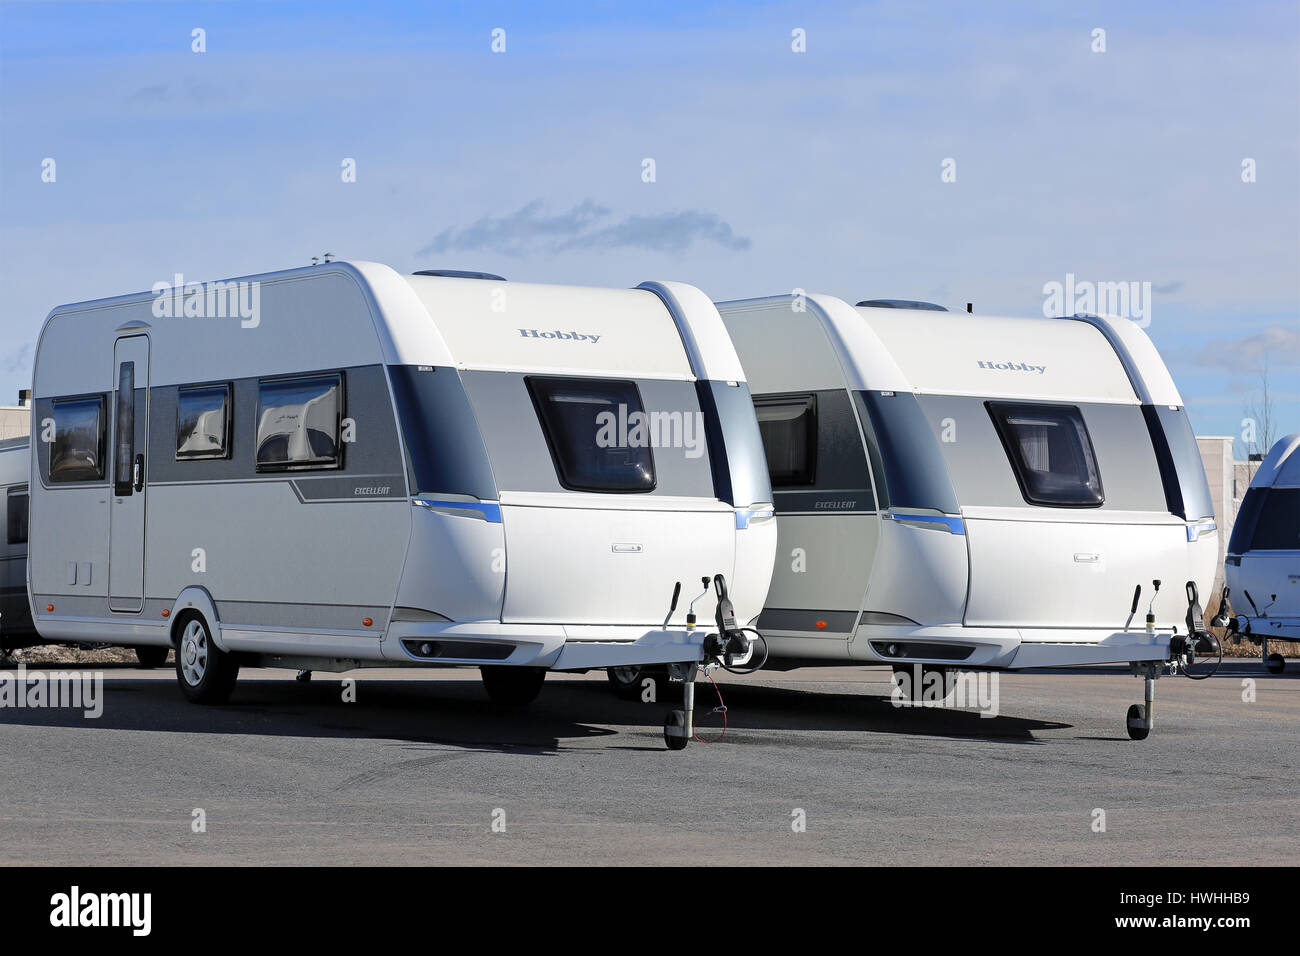 TURKU, FINLAND - MARCH 18, 2017: Modern Hobby Excellent Camper Caravans on display on a yard on a beautiful day of spring. Stock Photo